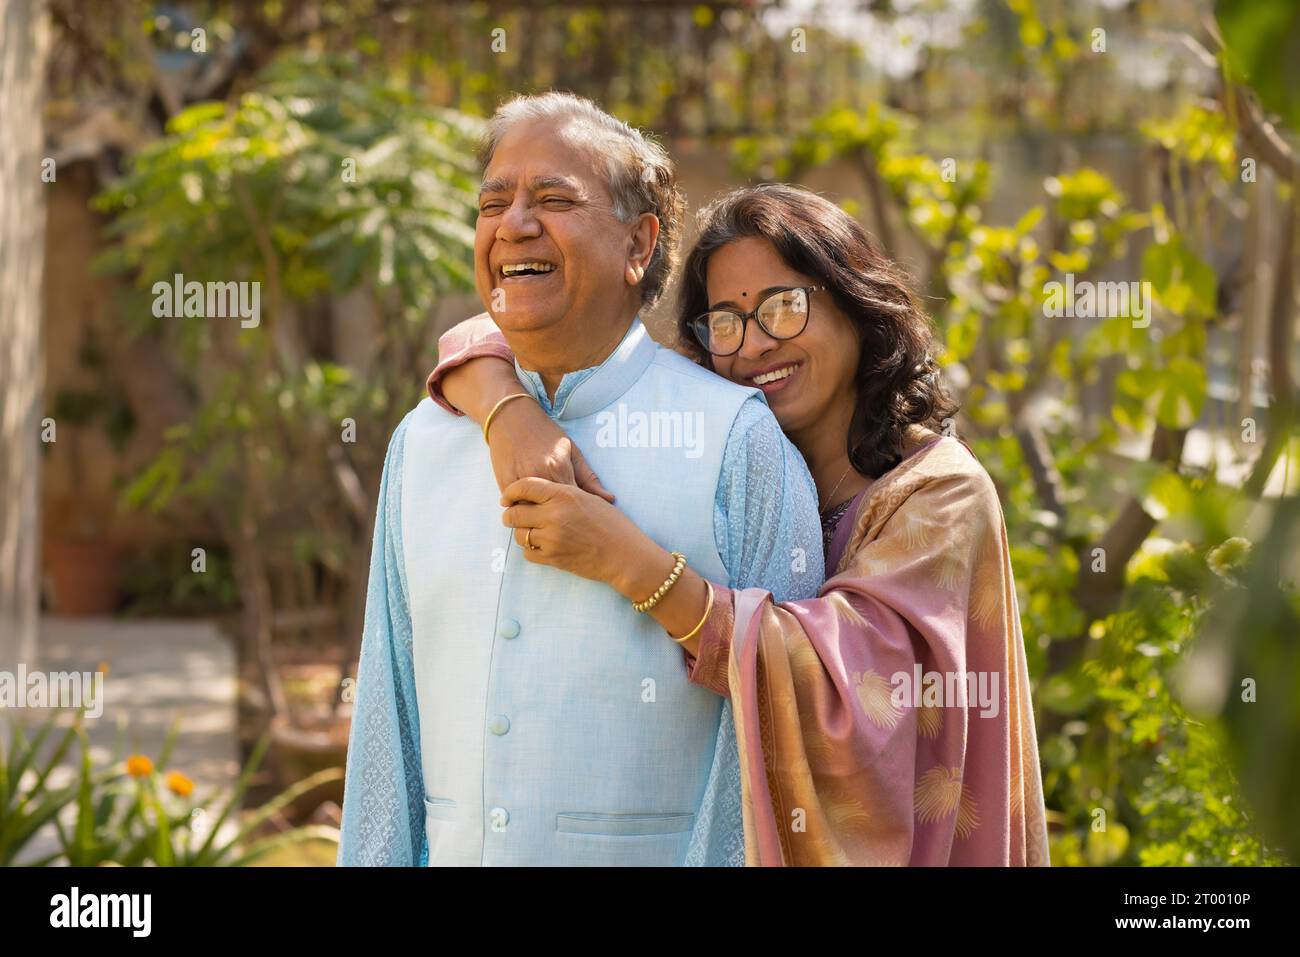 Portrait of Mature couple embracing in garden Stock Photo